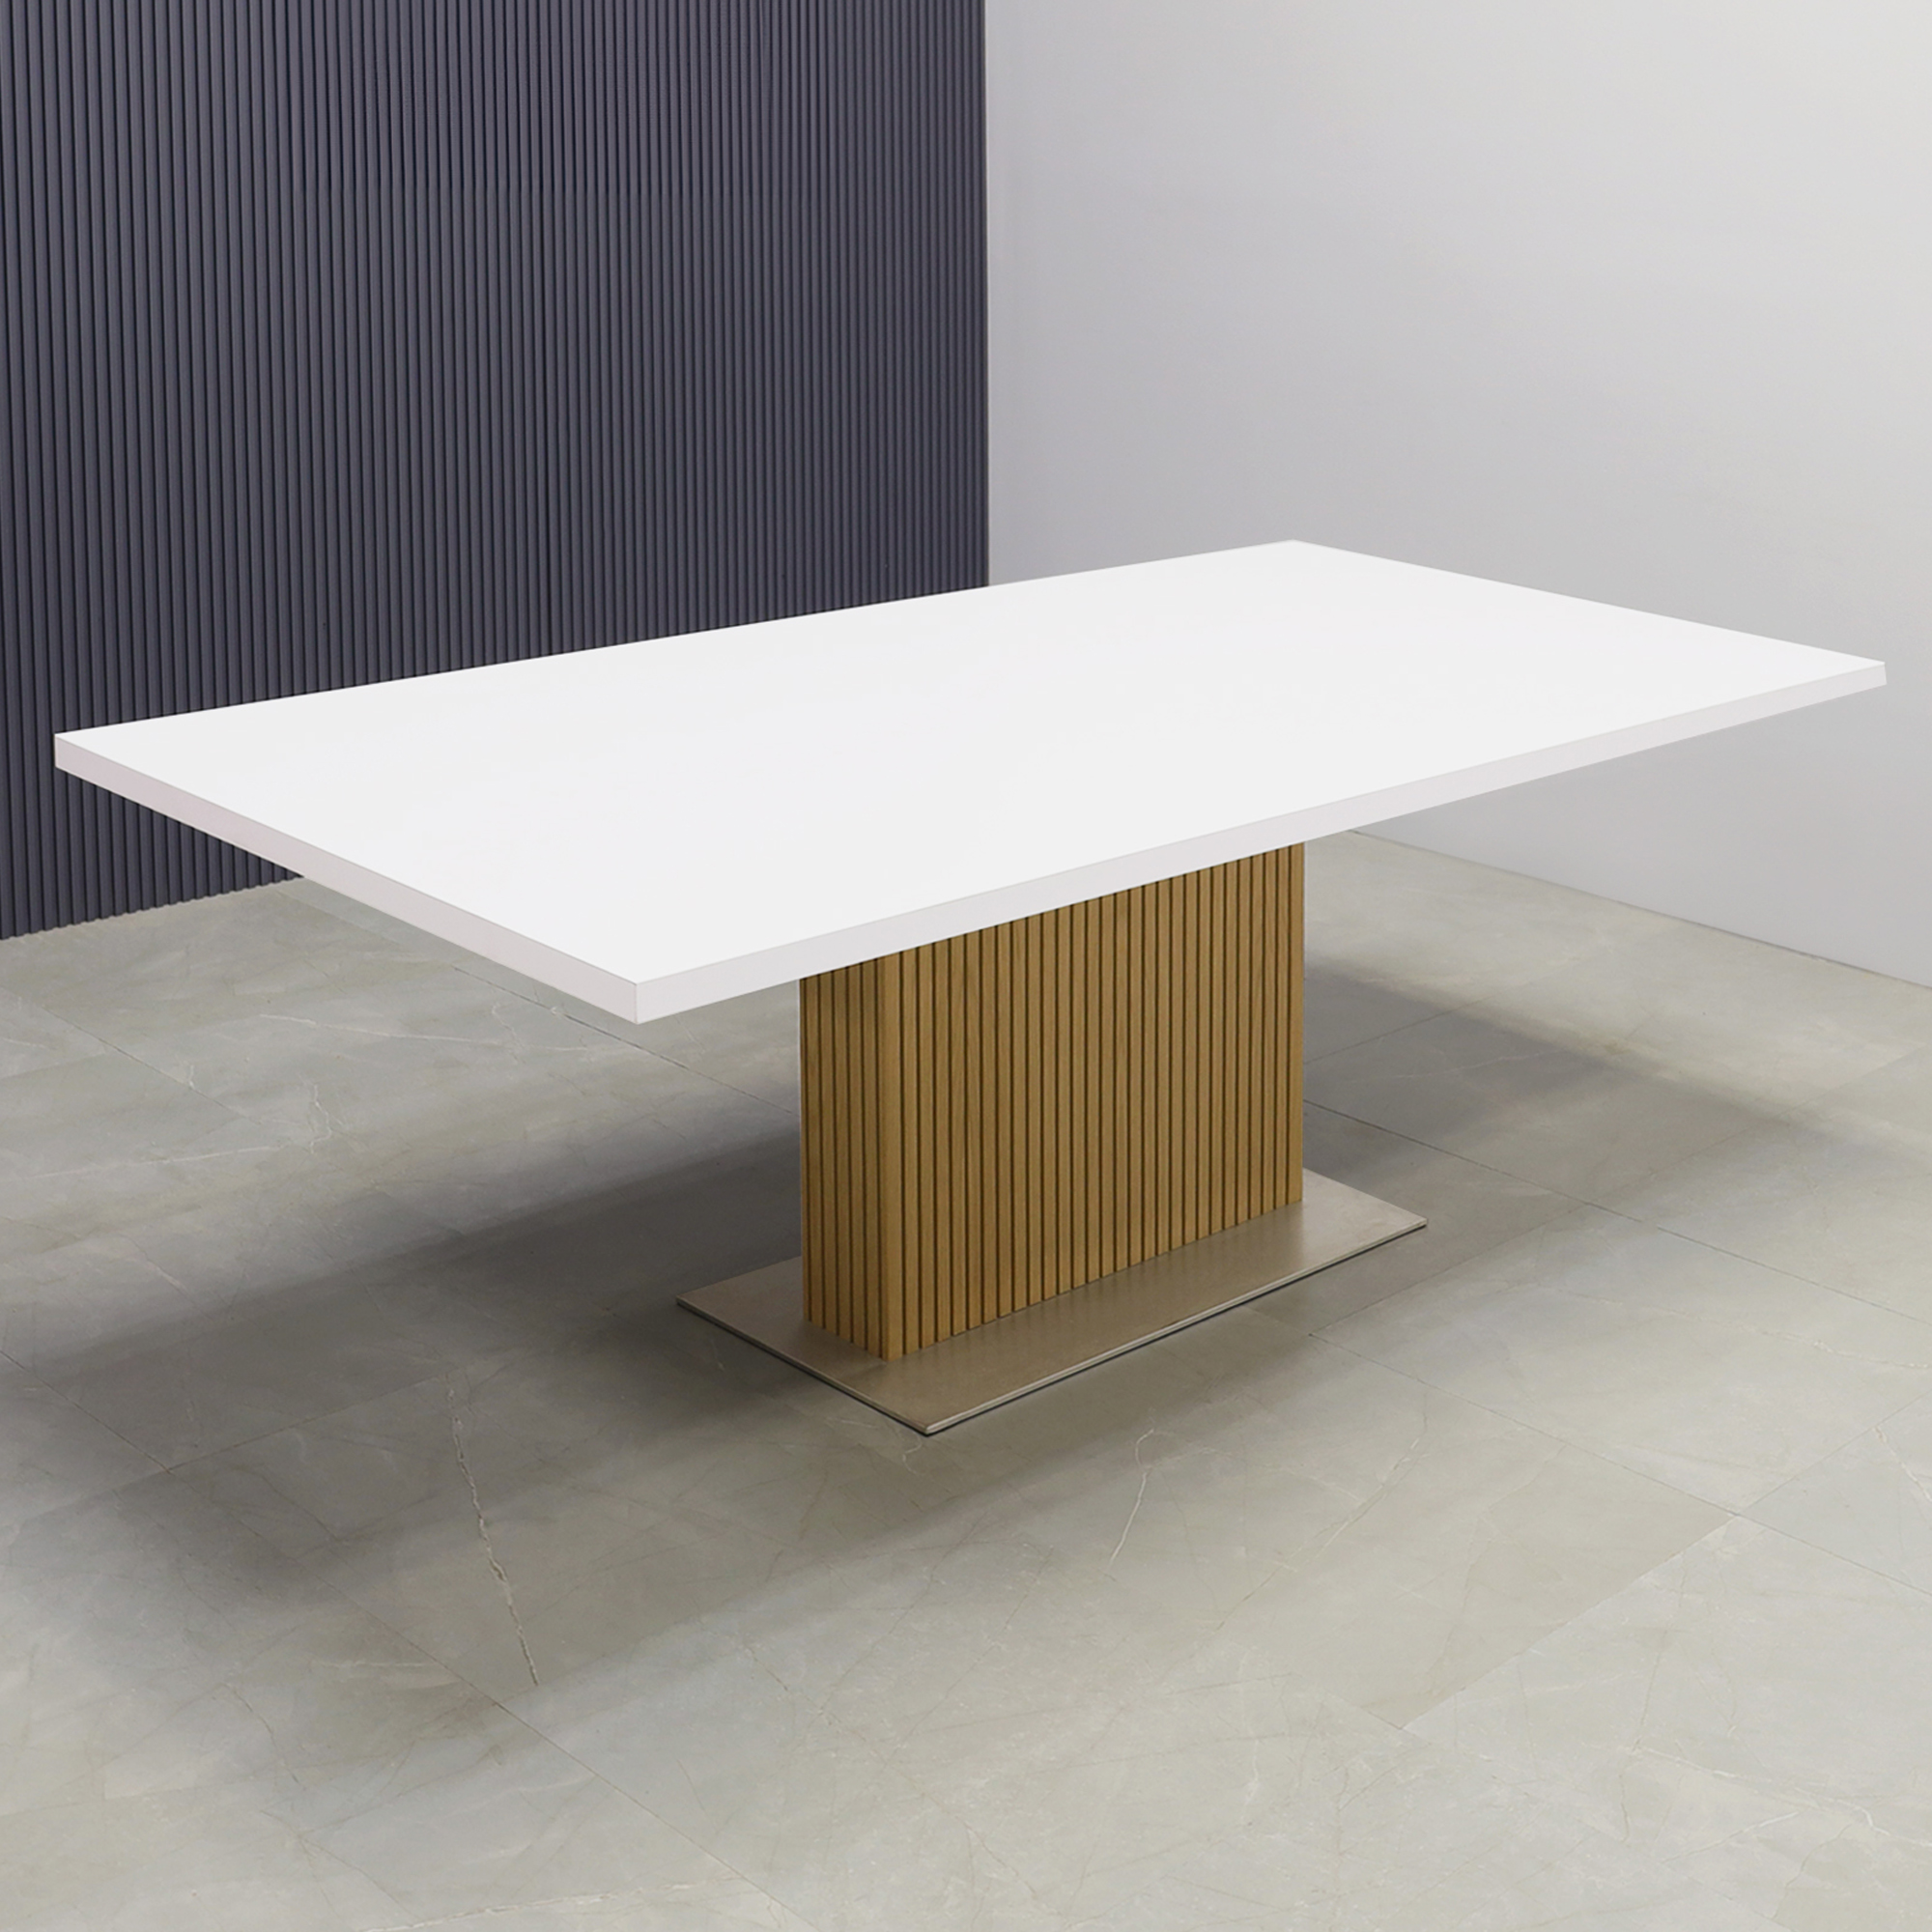 84-inch Newton Rectangular Conference Table in white matte laminate top and custom pedestal base in maple tambour and metal leg, shown here.